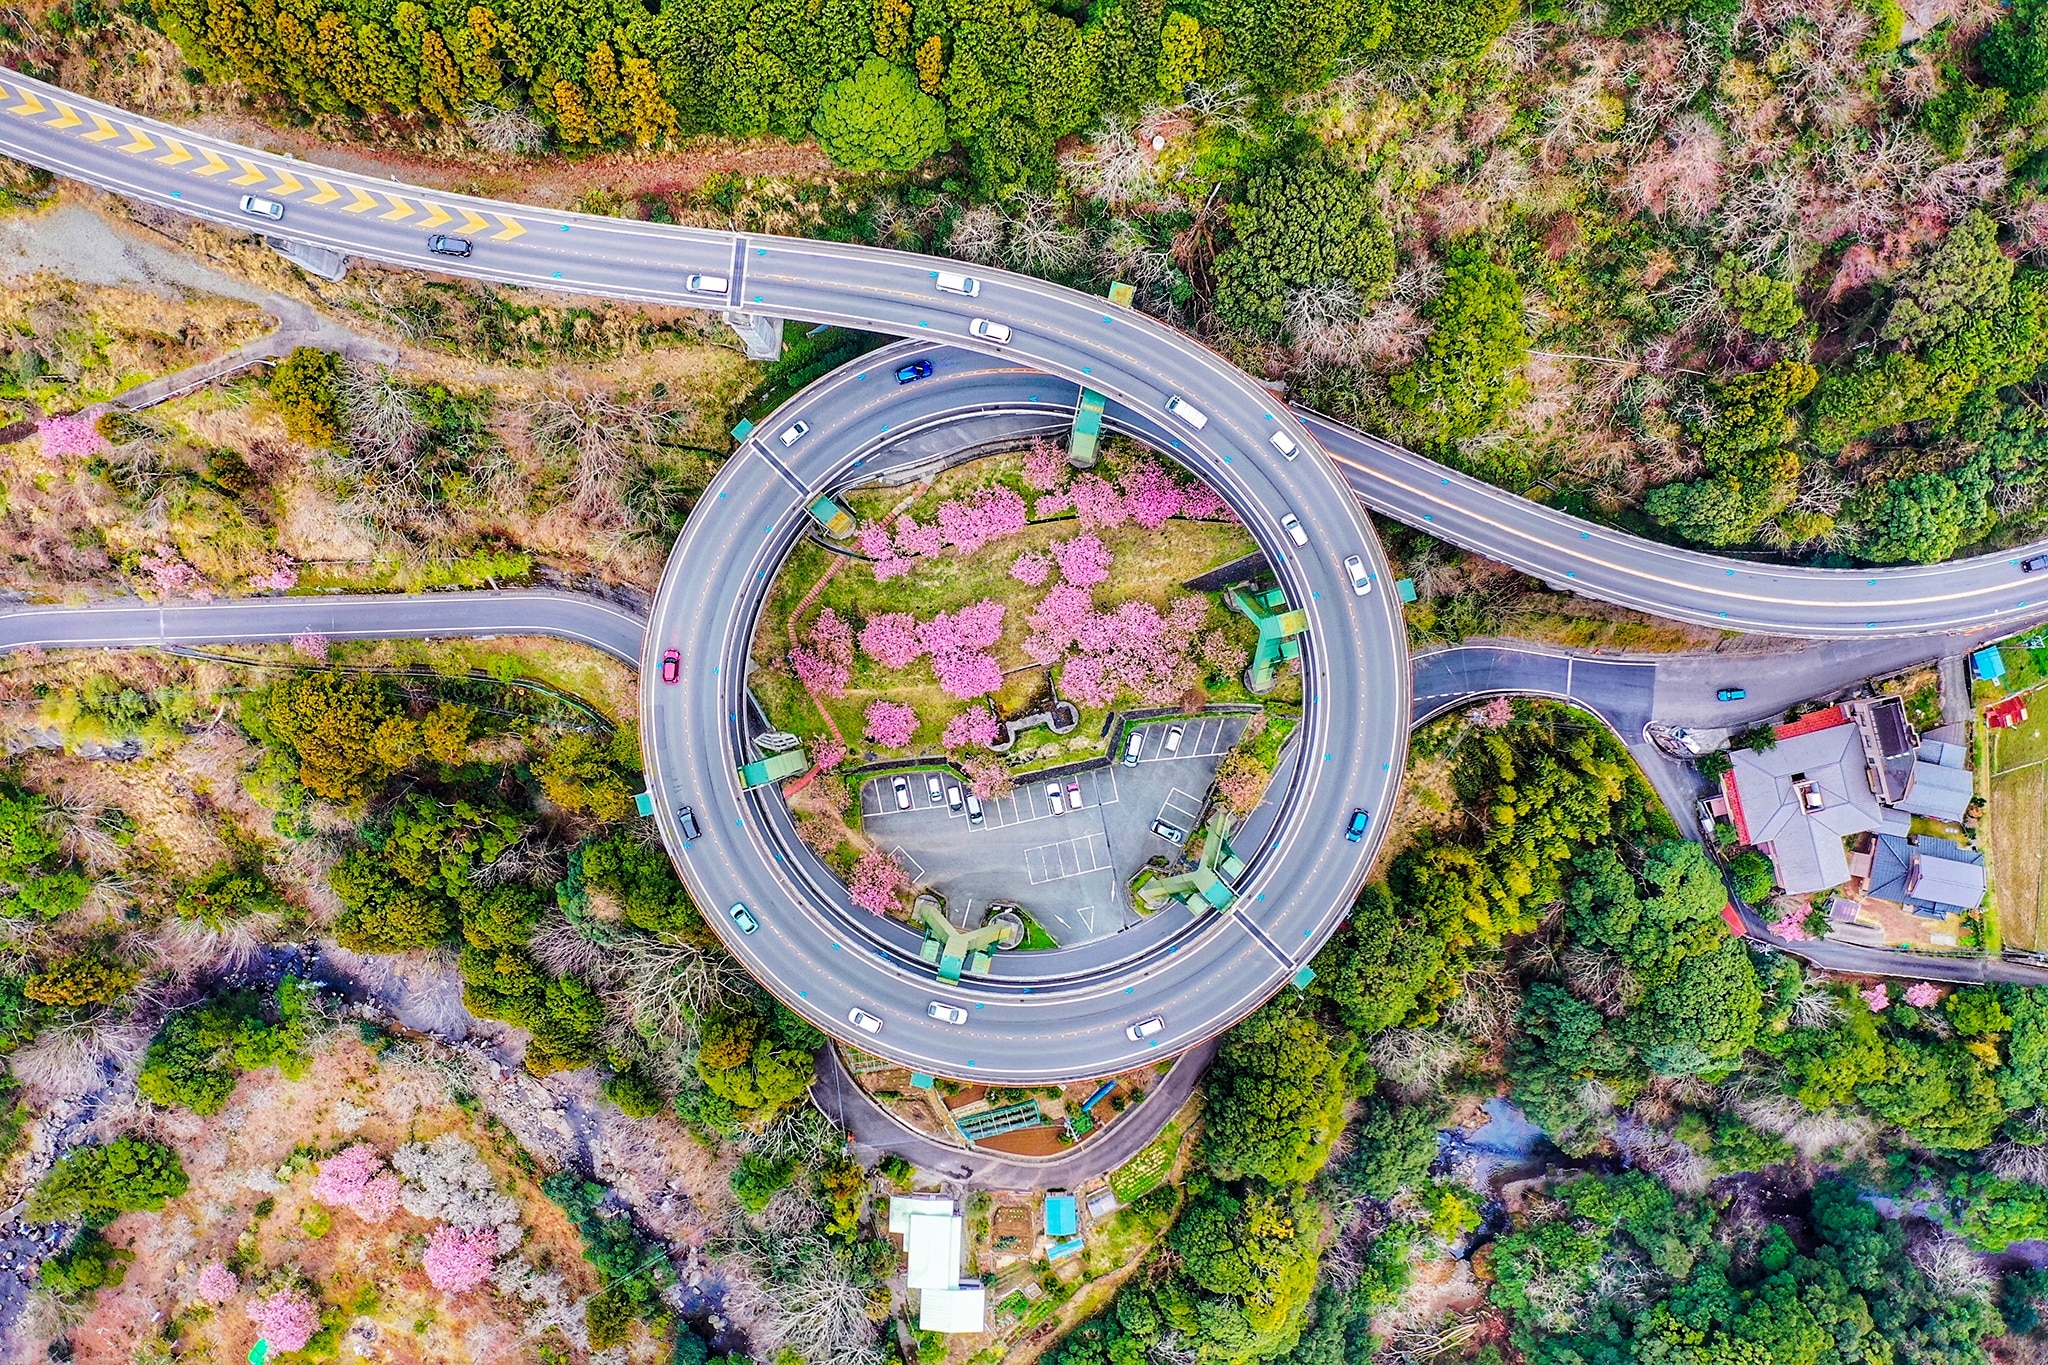 This bridge is amazing and great in design. in the Kawazu area of Japan. The top view taken by drones could see the Sakura inside the loop during spring.
#Ontheroad